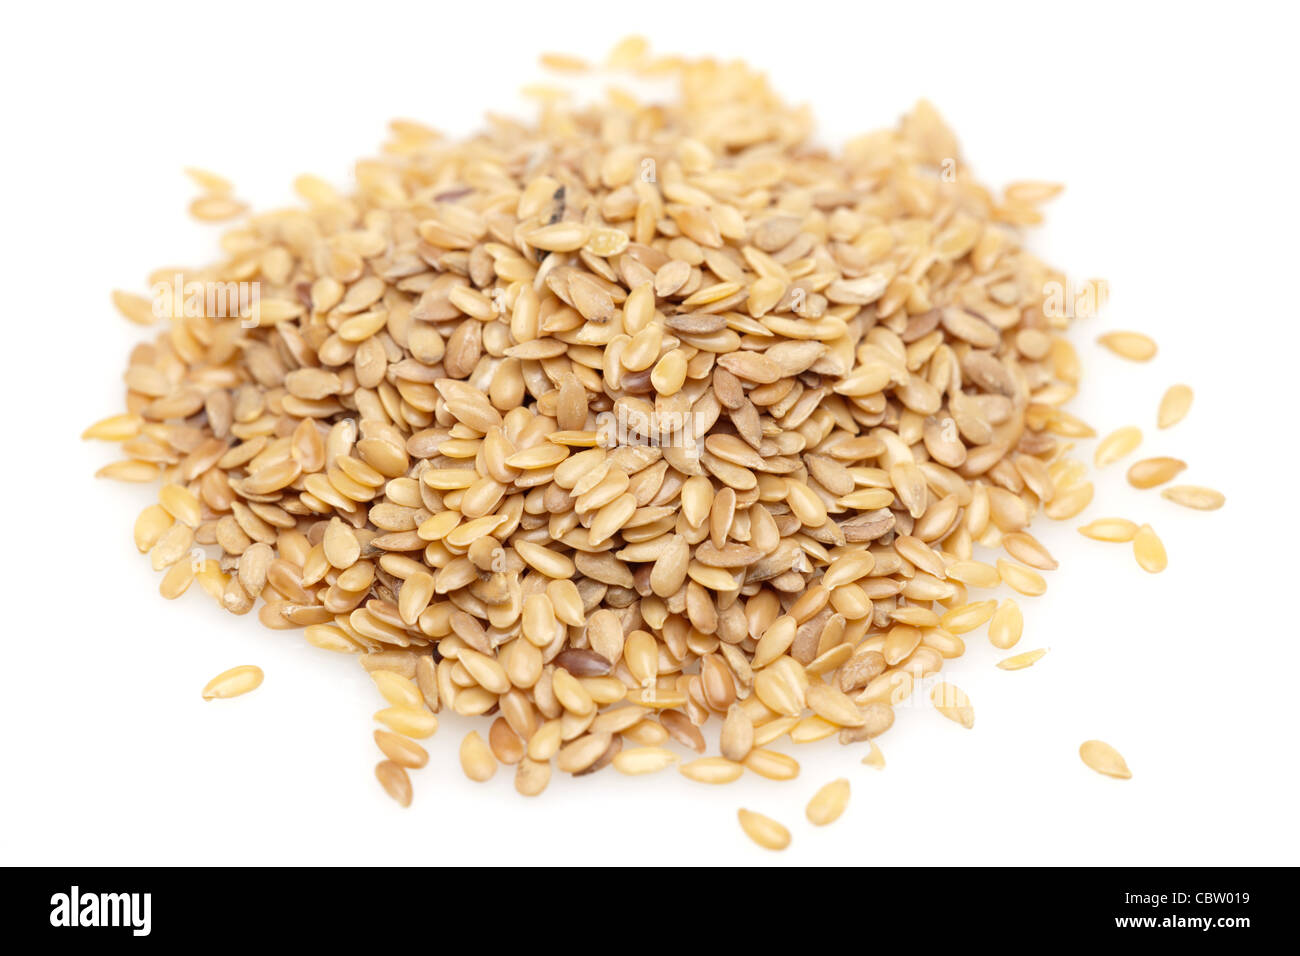 Pile of golden linseed seeds Stock Photo